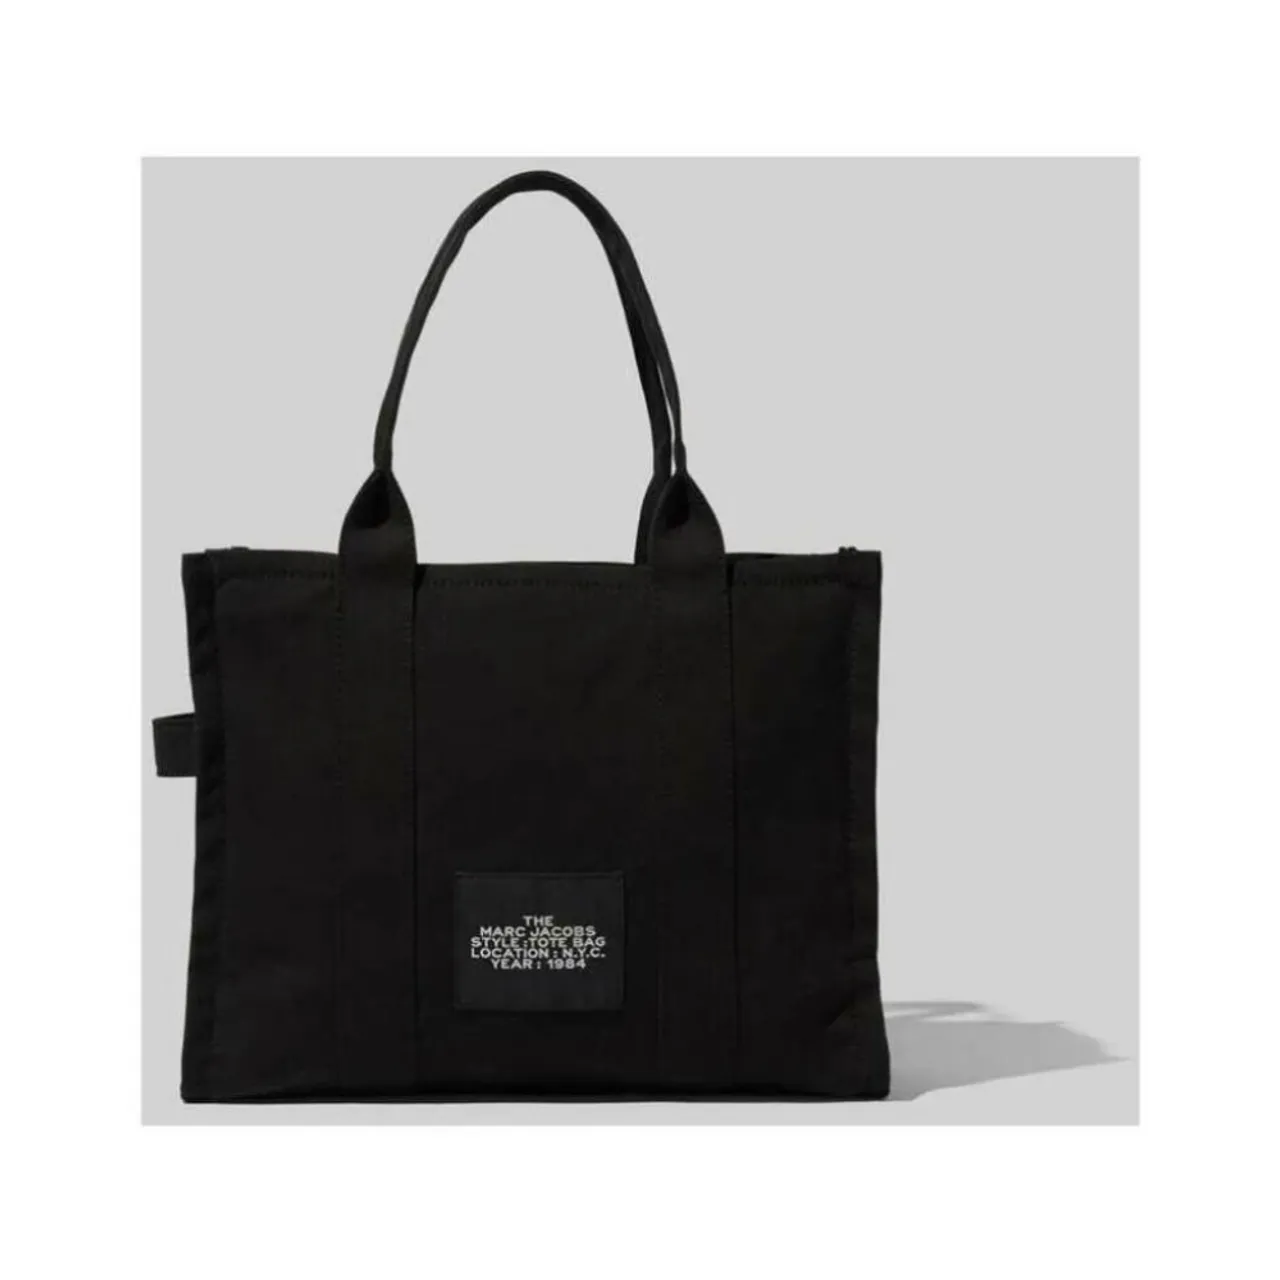 Marc Jacobs , The Tote Bag ,Black female, Sizes: ONE SIZE